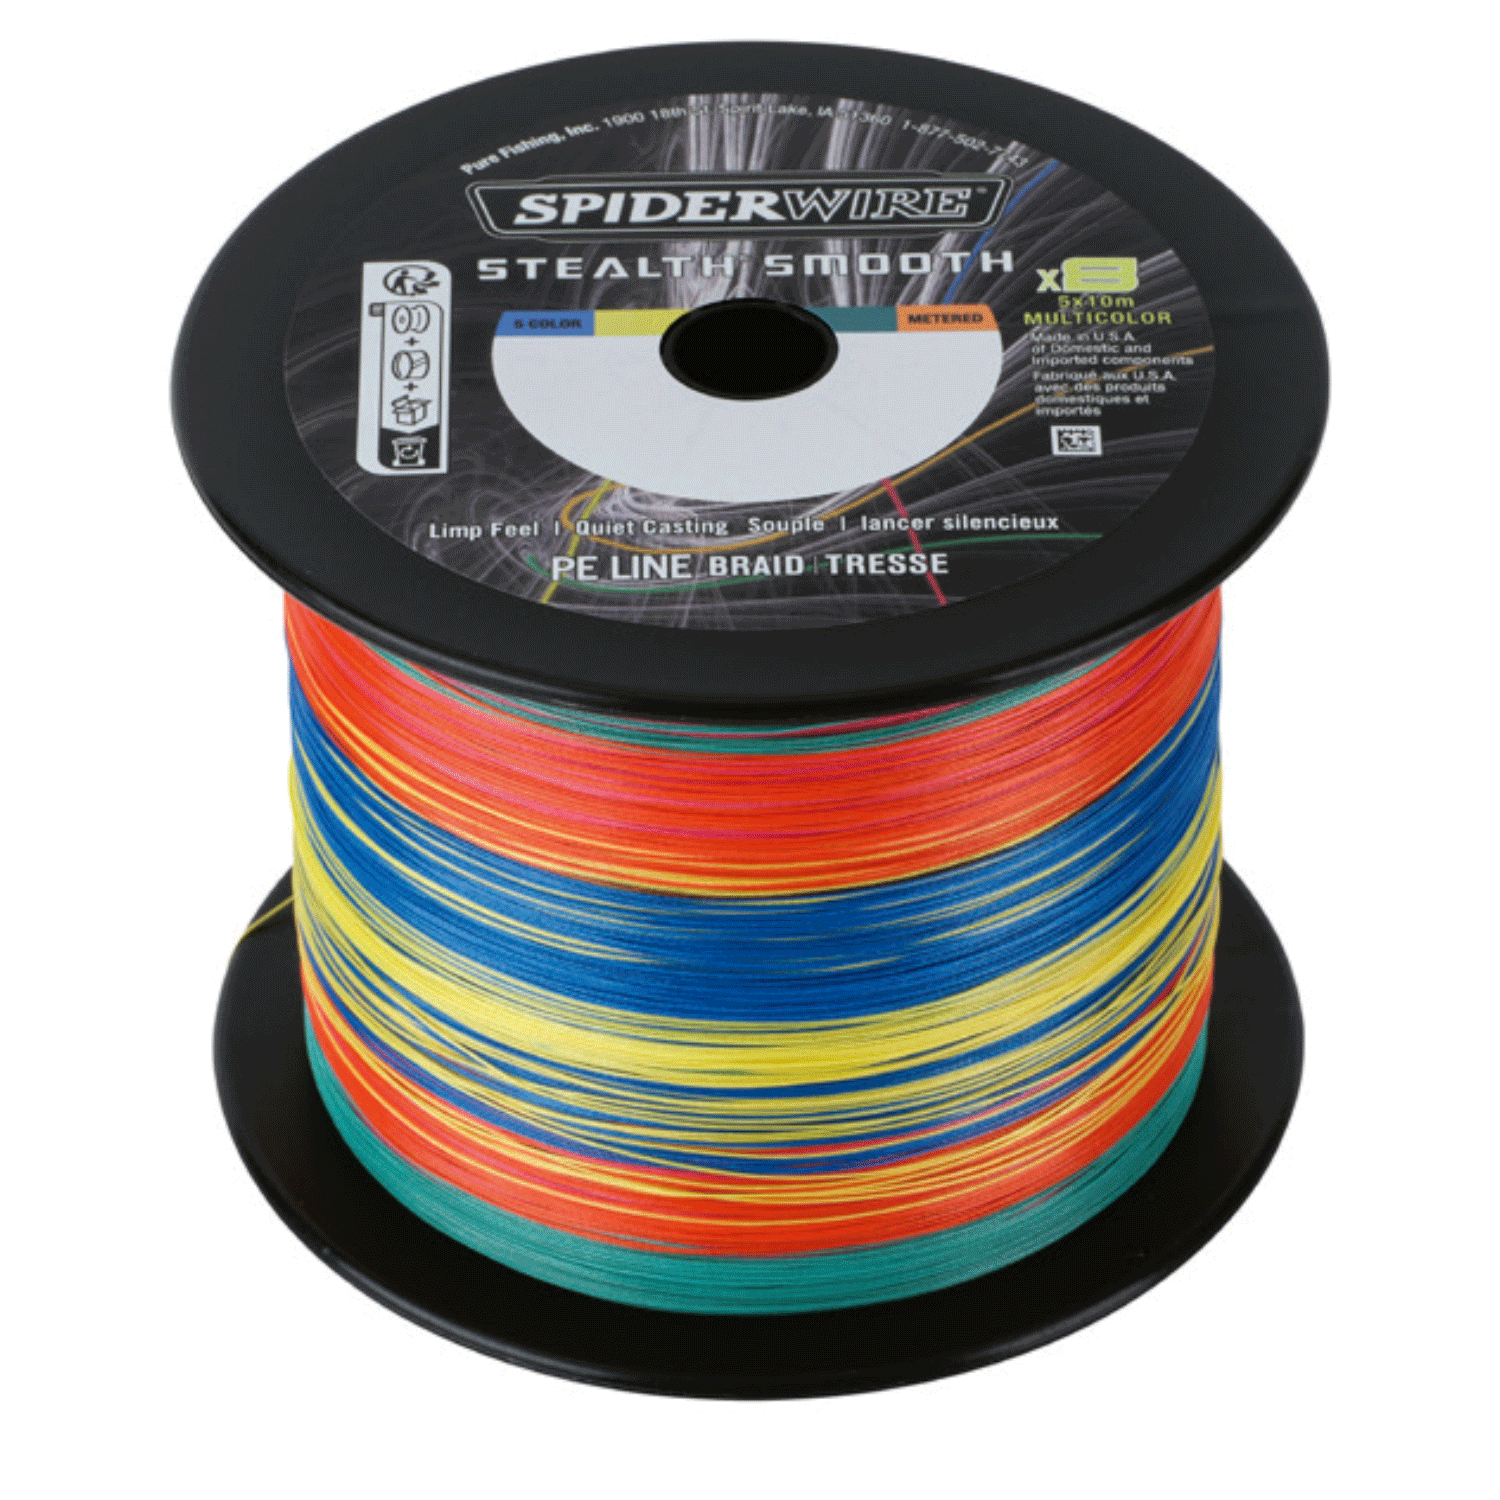 SpiderWire Stealth Smooth8 Braid - Multicolour – Glasgow Angling Centre